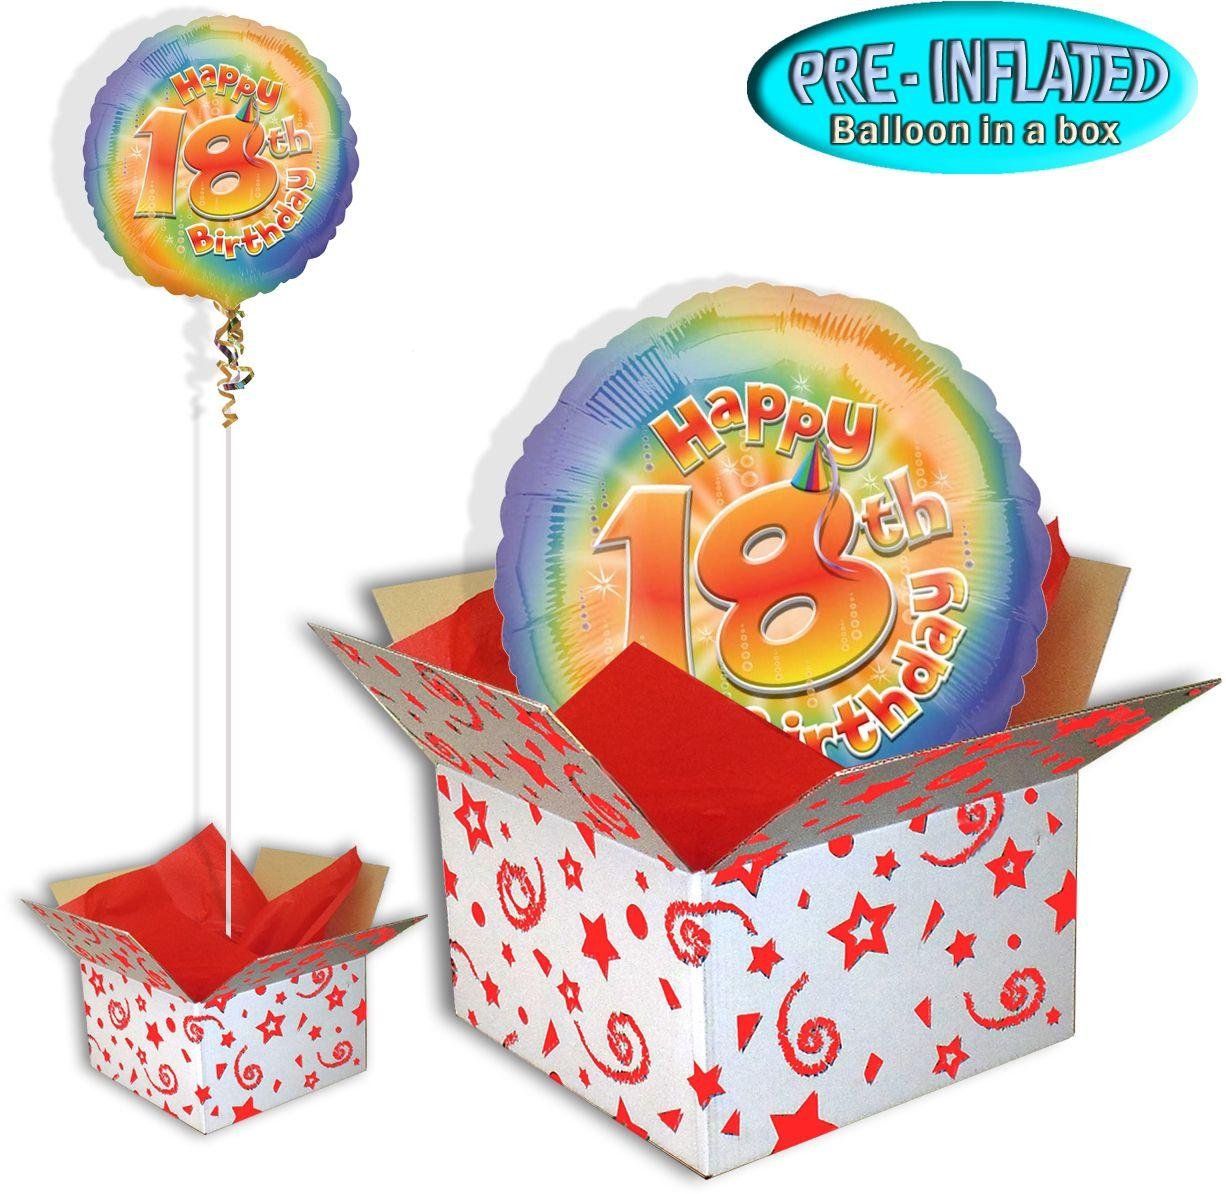 Happy 18th Birthday Balloon in a Box. review